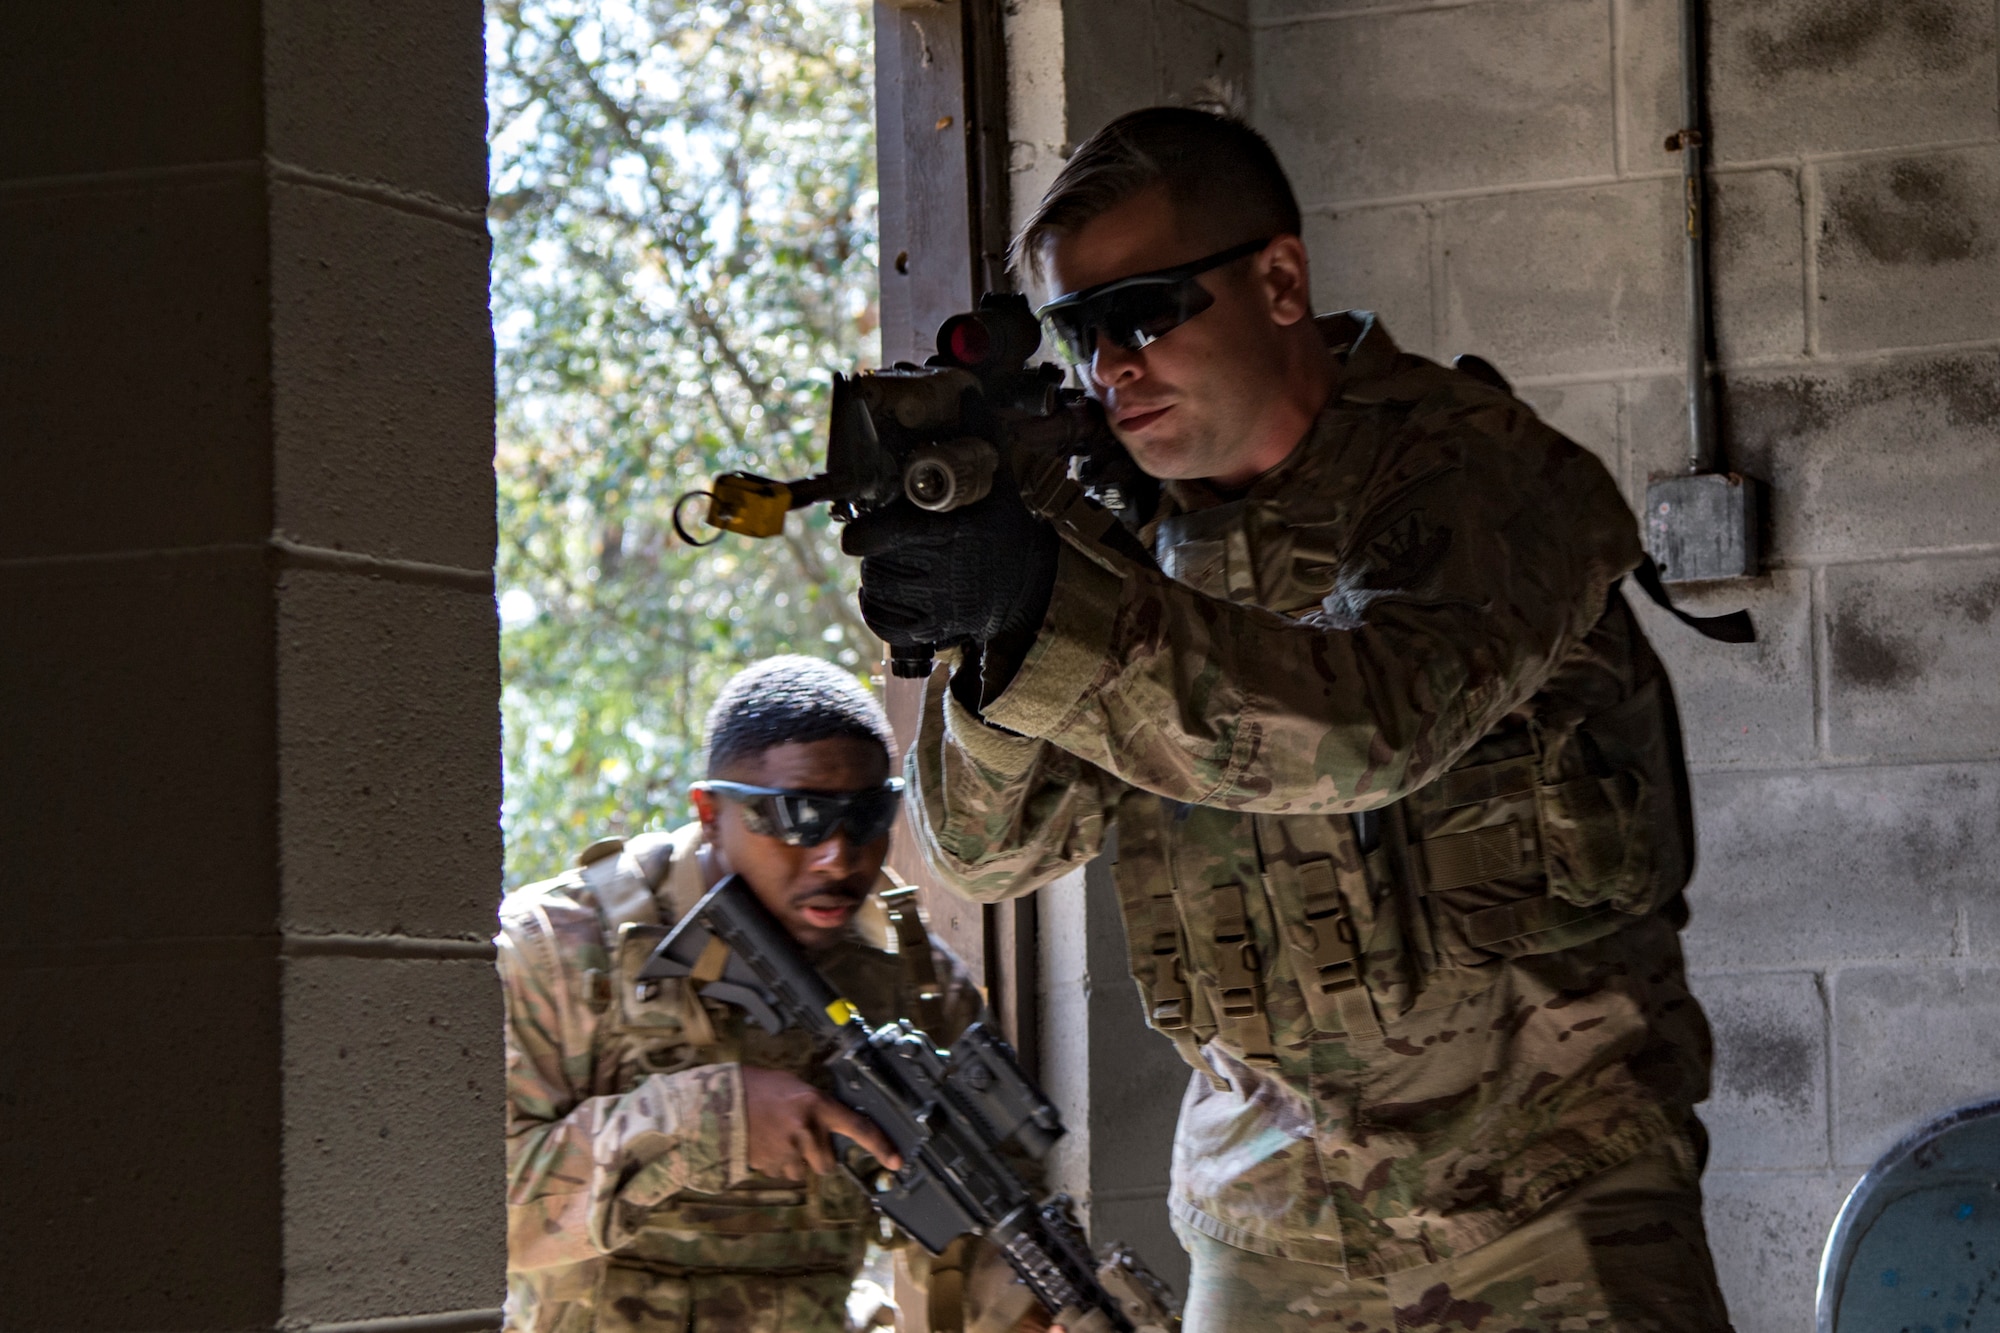 Airmen from the 824th Base Defense Squadron storm a building during close-quarters battle training, Feb. 28, 2018, at Moody Air Force Base, Ga. The 820th Base Defense Group welcomed a member of the British Royal Air Force to embed into multiple training situations to help strengthen combined operations between U.S. and British forces. (U.S. Air Force photo by Senior Airman Daniel Snider)